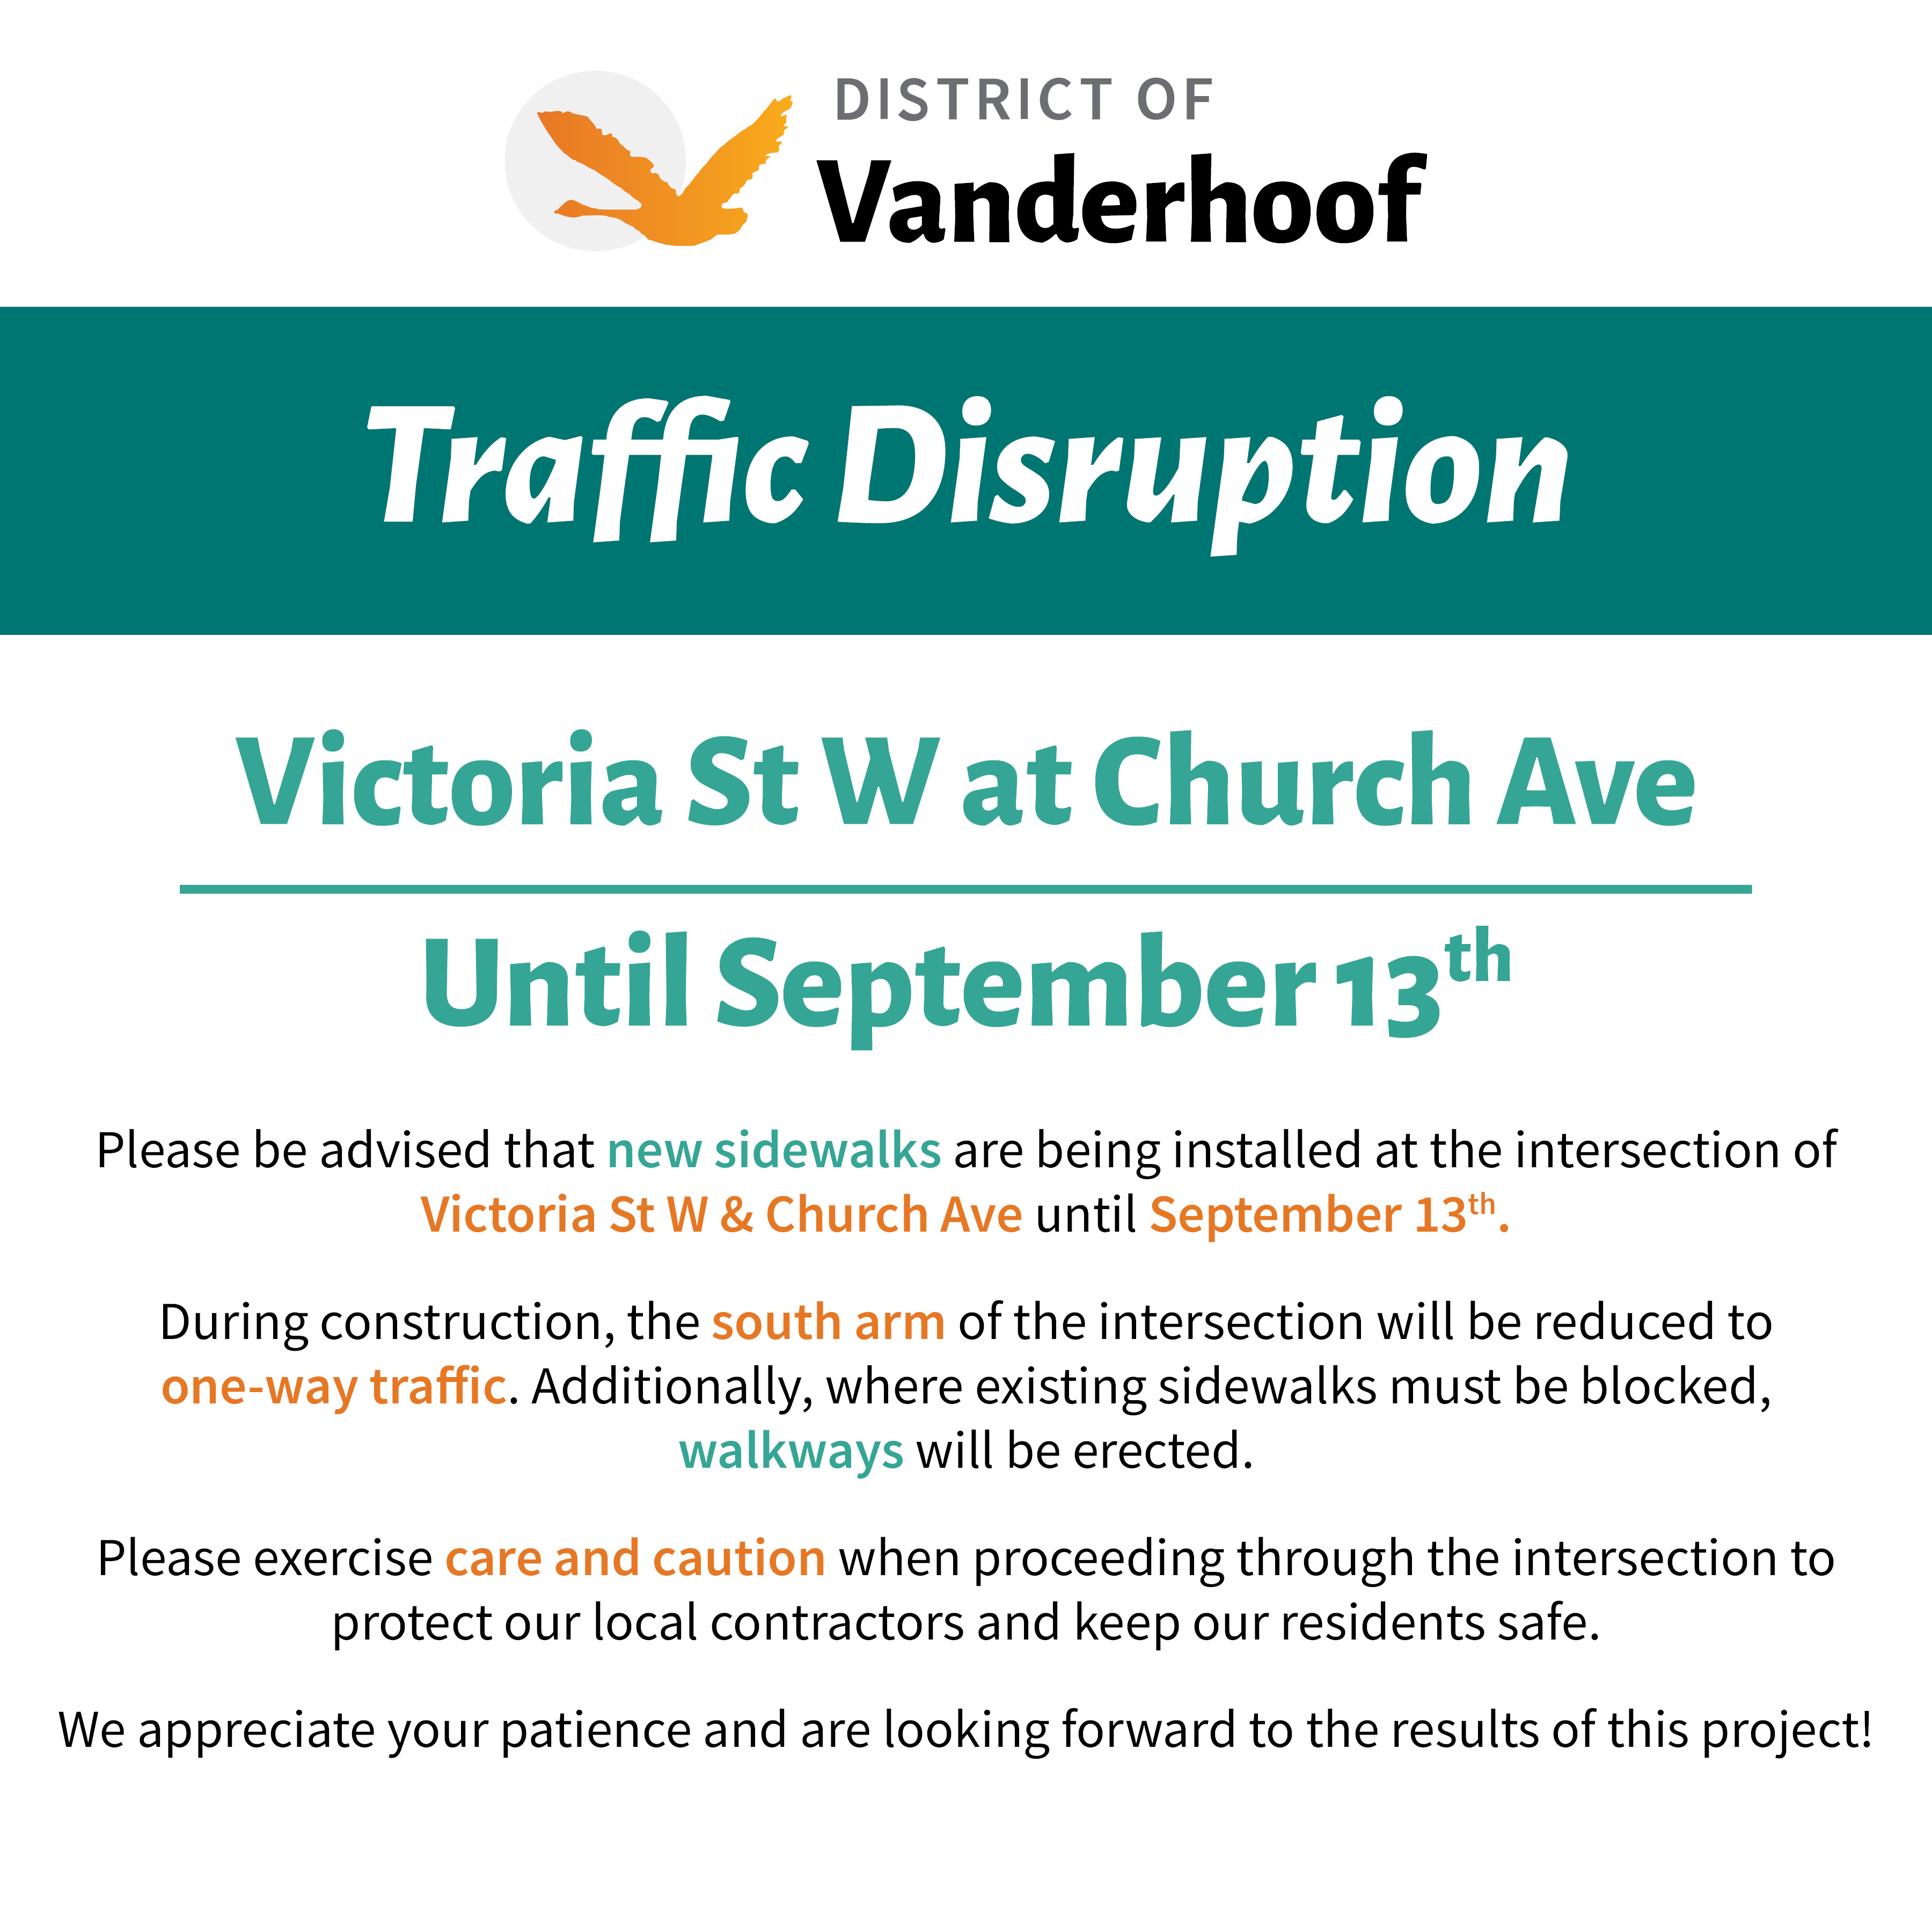 Traffic Disruption. Victoria St W at Church Ave Until September 13th. Please be advised that new sidewalks are being installed at the intersection of Victoria St W & Church Ave until September 13th. During construction, the south arm of the intersection will be reduced to one-way traffic. Additionally, where existing sidewalks must be blocked, walkways will be erected. Please exercise care and caution when proceeding through the intersection to protect our local contractors and keep our residents safe. We appreciate your patience and are looking forward to the results of this project!